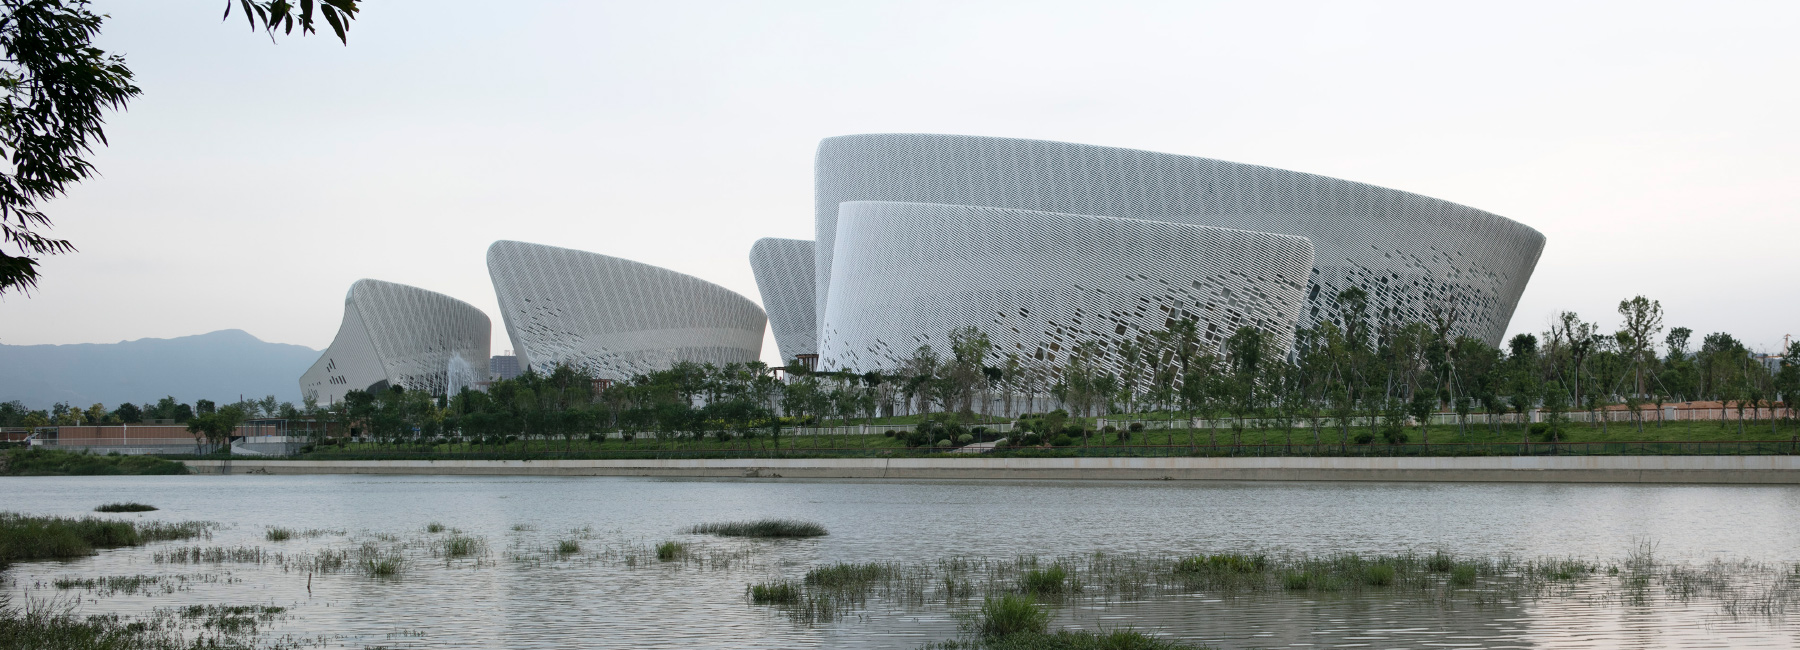 PES-architects completes fuzhou strait culture and art center in china